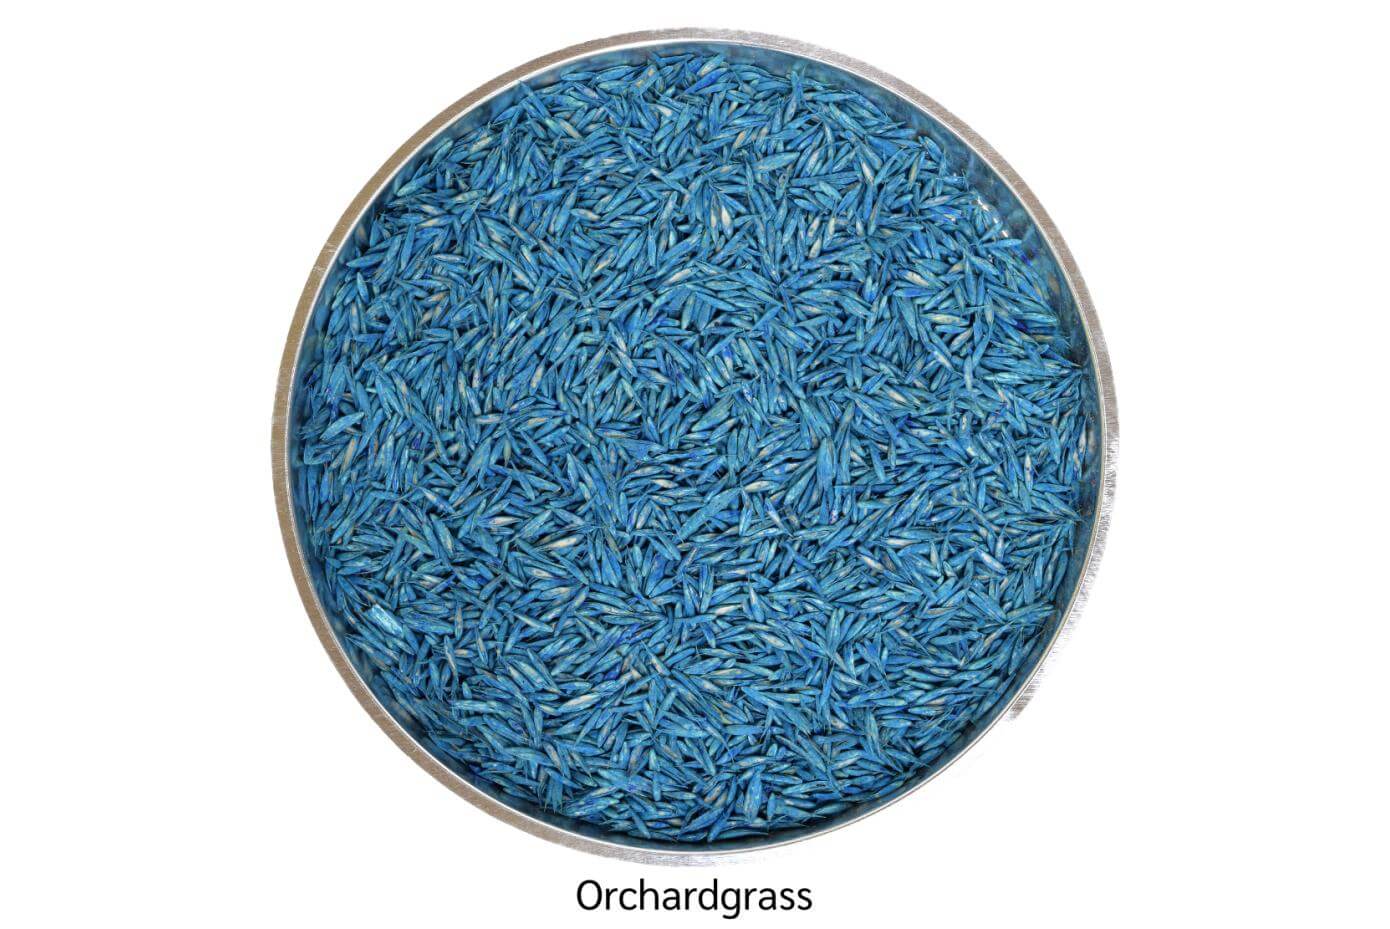 Coated orchardgrass seed